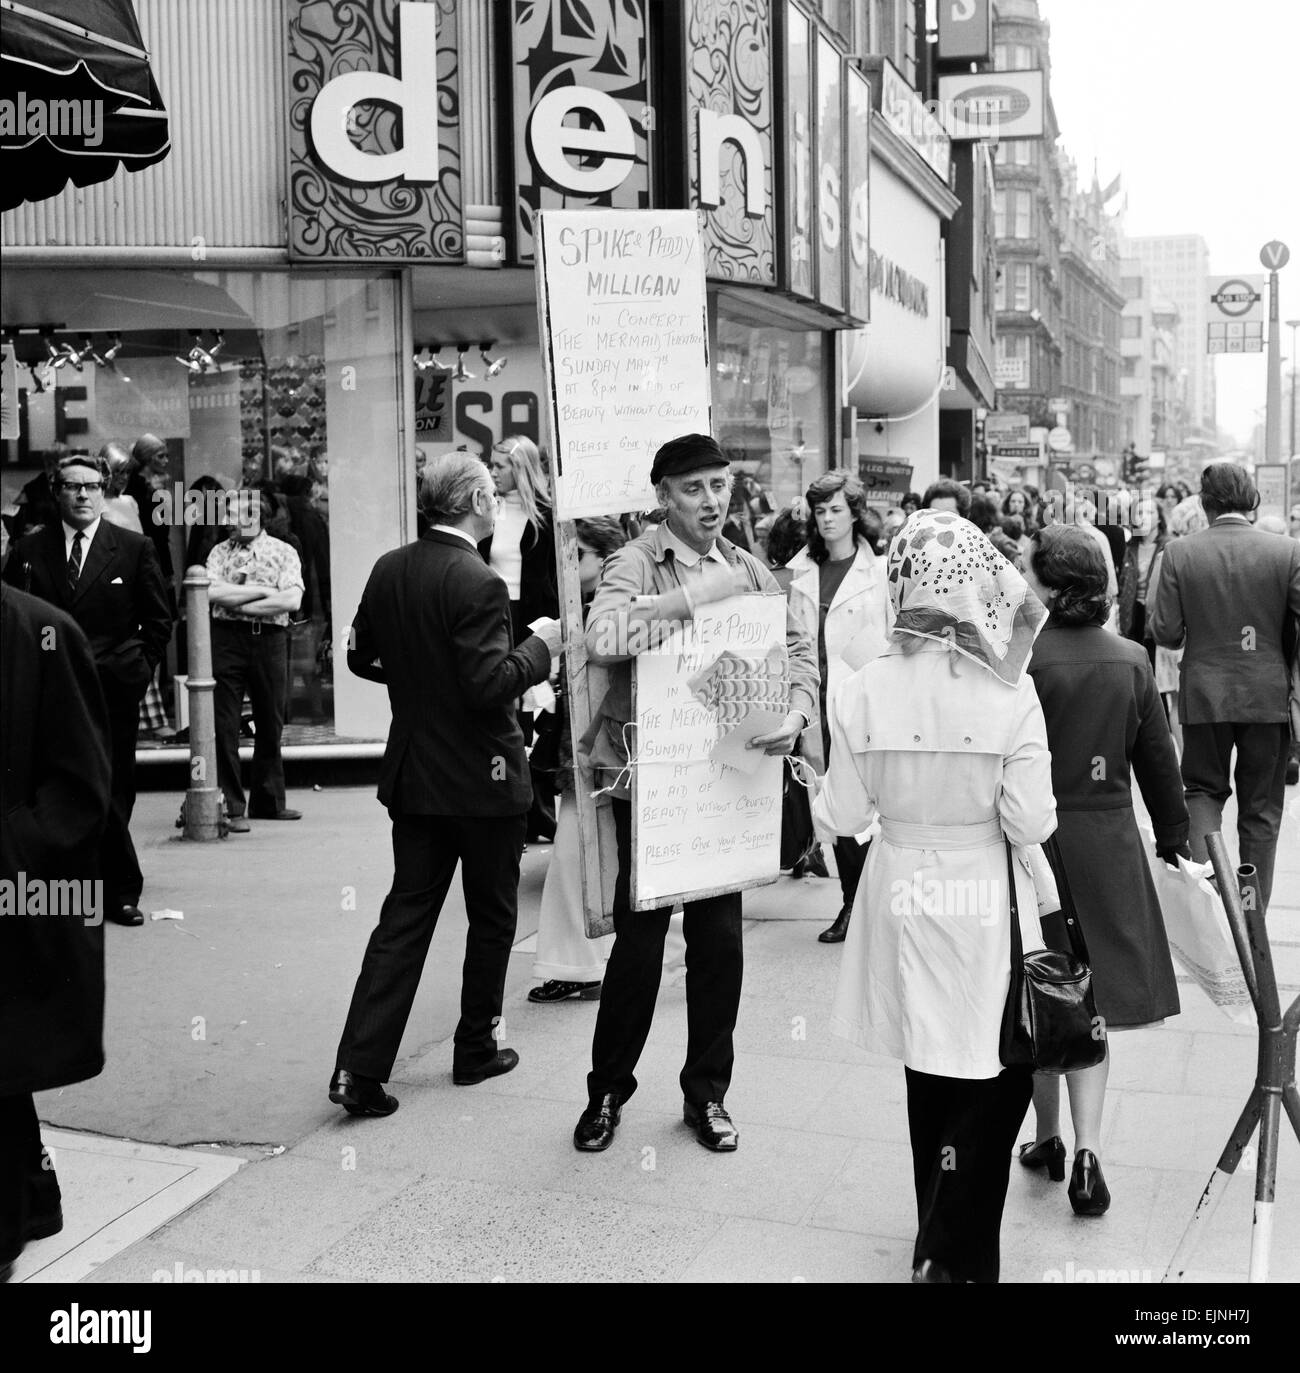 Spike Milligan & wife Paddy use a Sandwich board - borrowed from British Rail Lost Property - to advertise their upcoming charity performance in aid of 'Beauty Without Cruelty' at the Mermaid Theatre London, 4th May 1972. *** Local Caption *** Paddy McMilligan Stock Photo